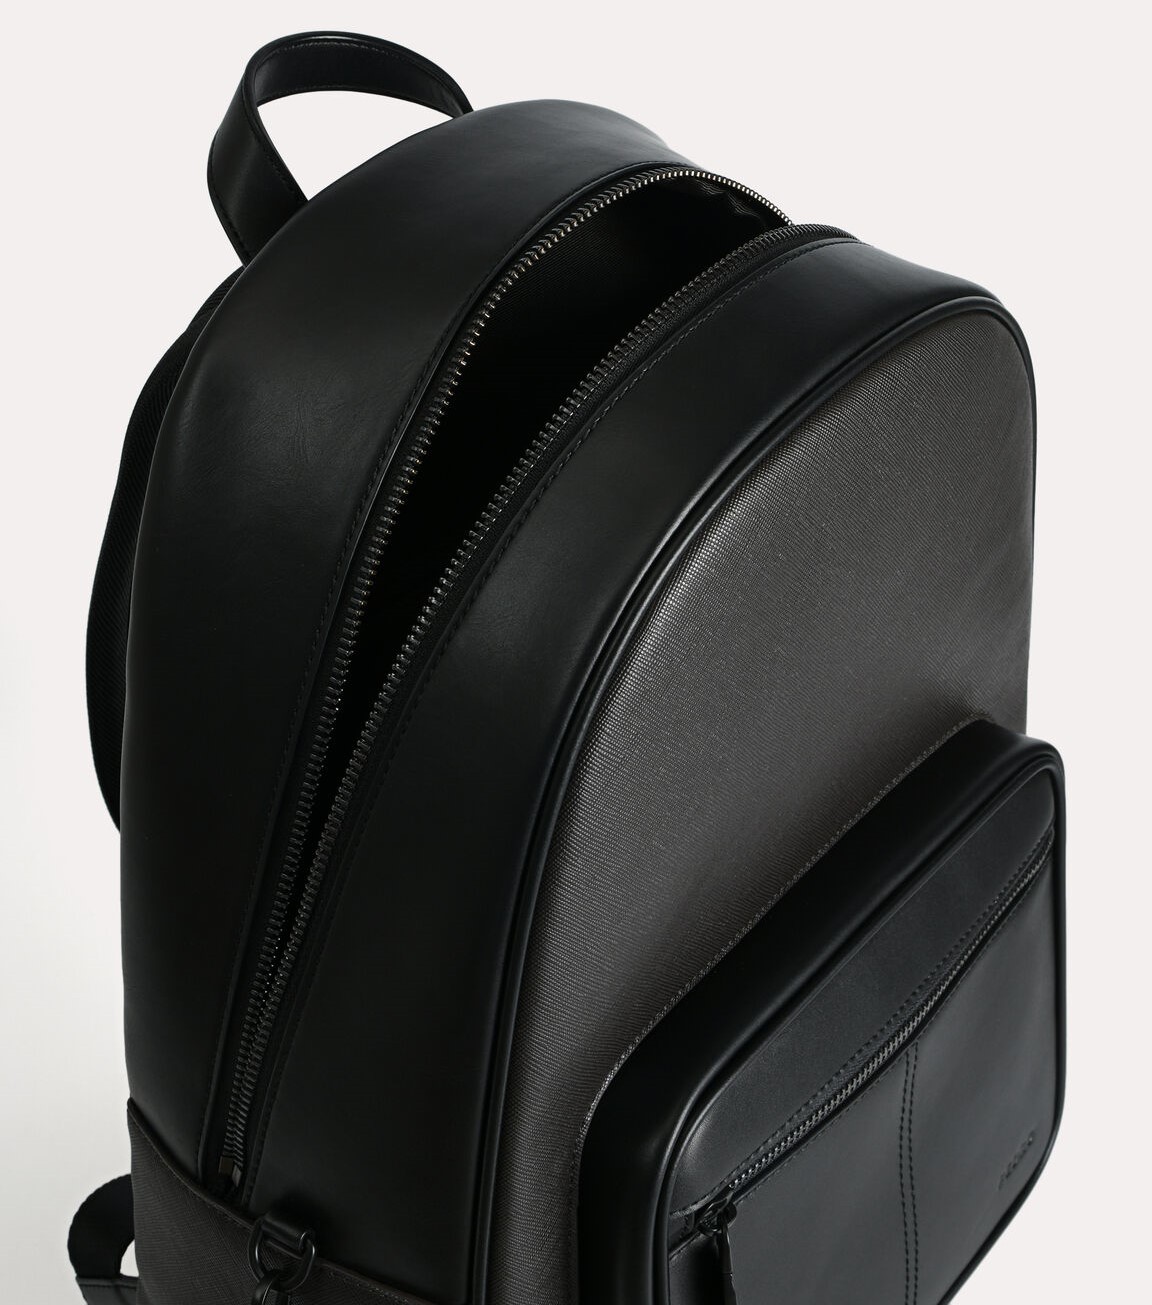 BALO NAM PEDRO STRUCTURED CHAIN BACKPACK 4